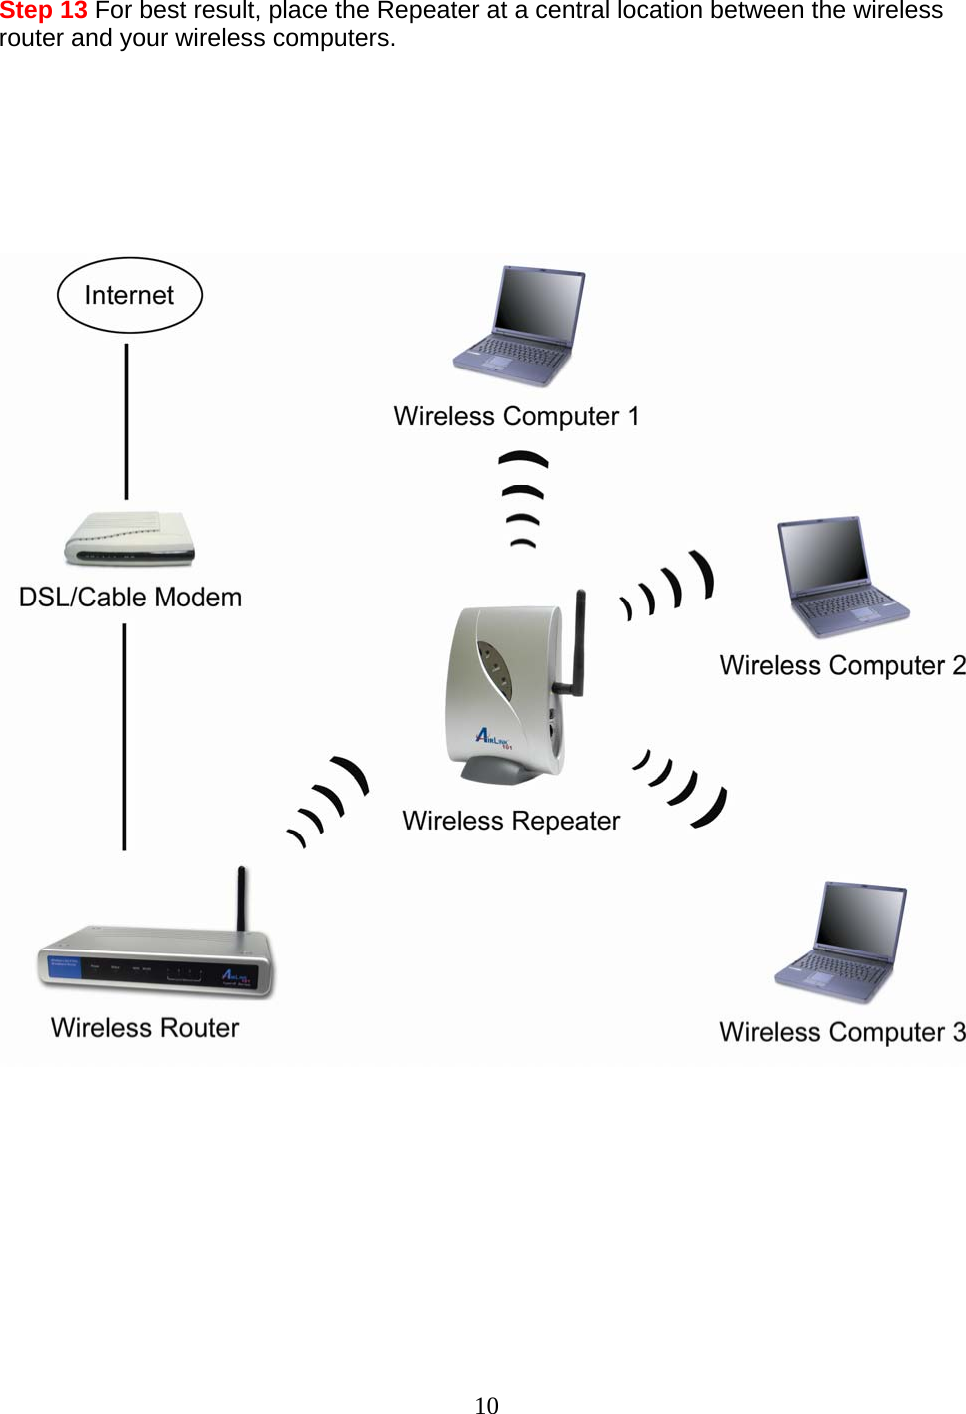 10 Step 13 For best result, place the Repeater at a central location between the wireless router and your wireless computers.                  